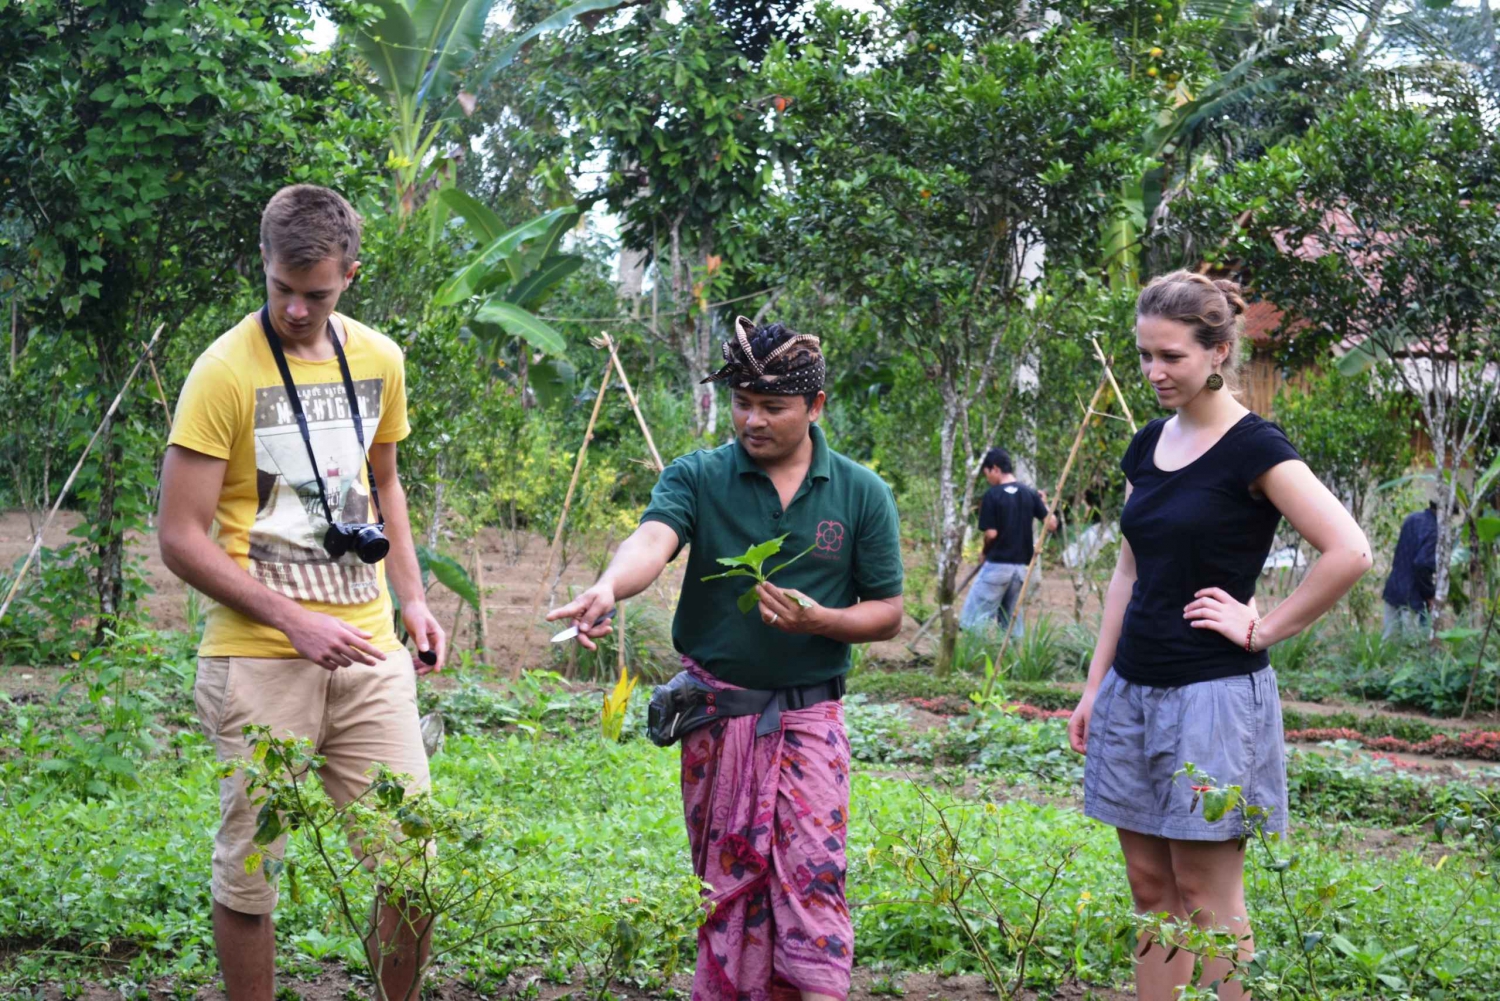 From Ubud: Balinese Cooking Class at an Organic Farm